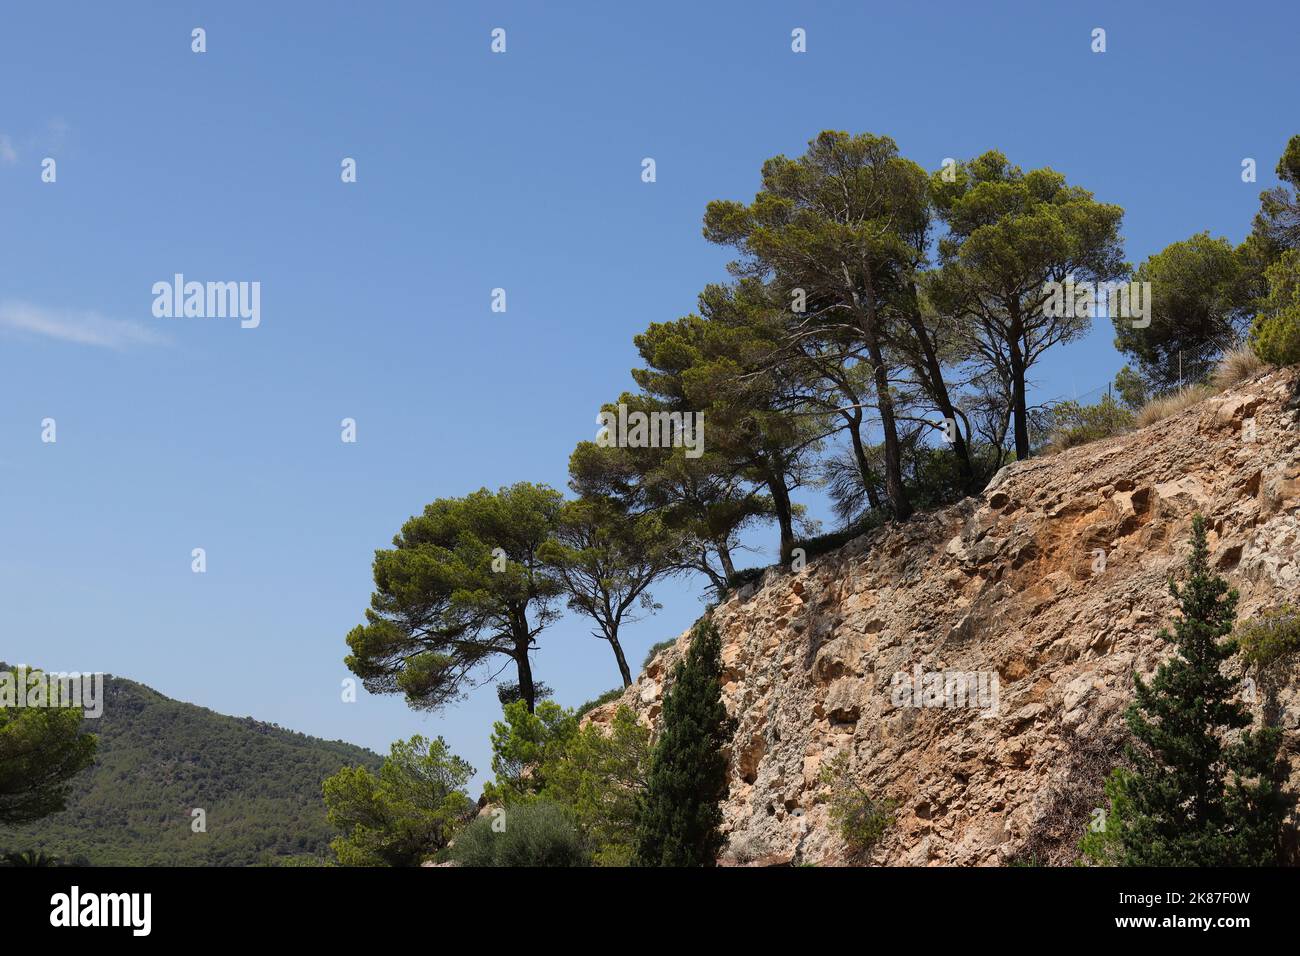 view of a group of beautiful pine trees on a rocky slope in front of a clear blue sky, view from below, copy space, Mallorca, Spain Stock Photo